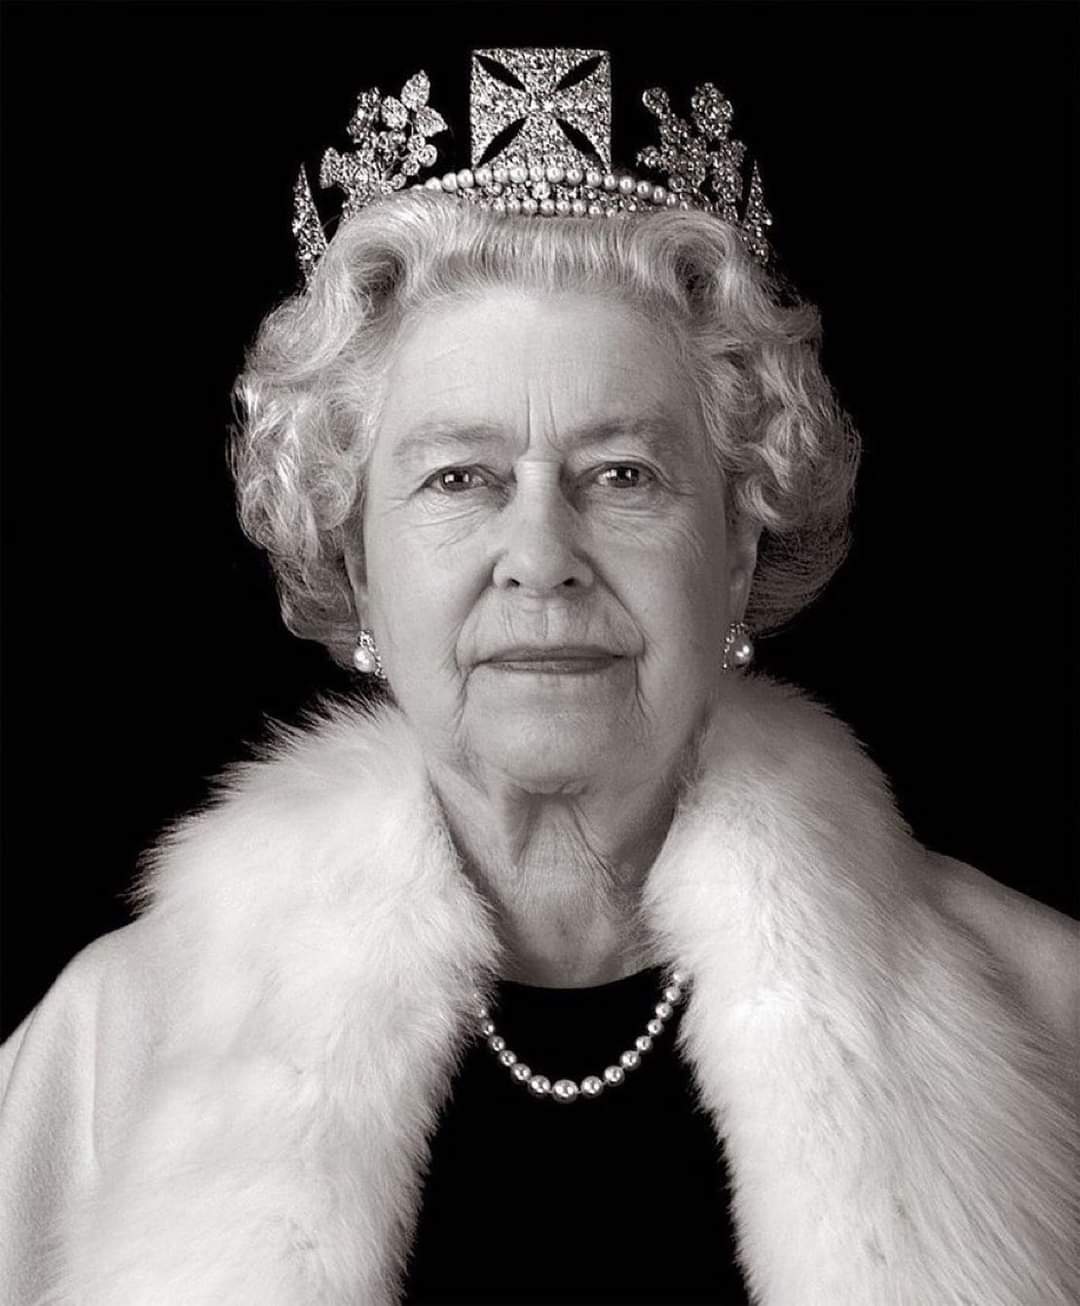 Advocate Agency pay tribute to Her Majesty Queen Elizabeth II